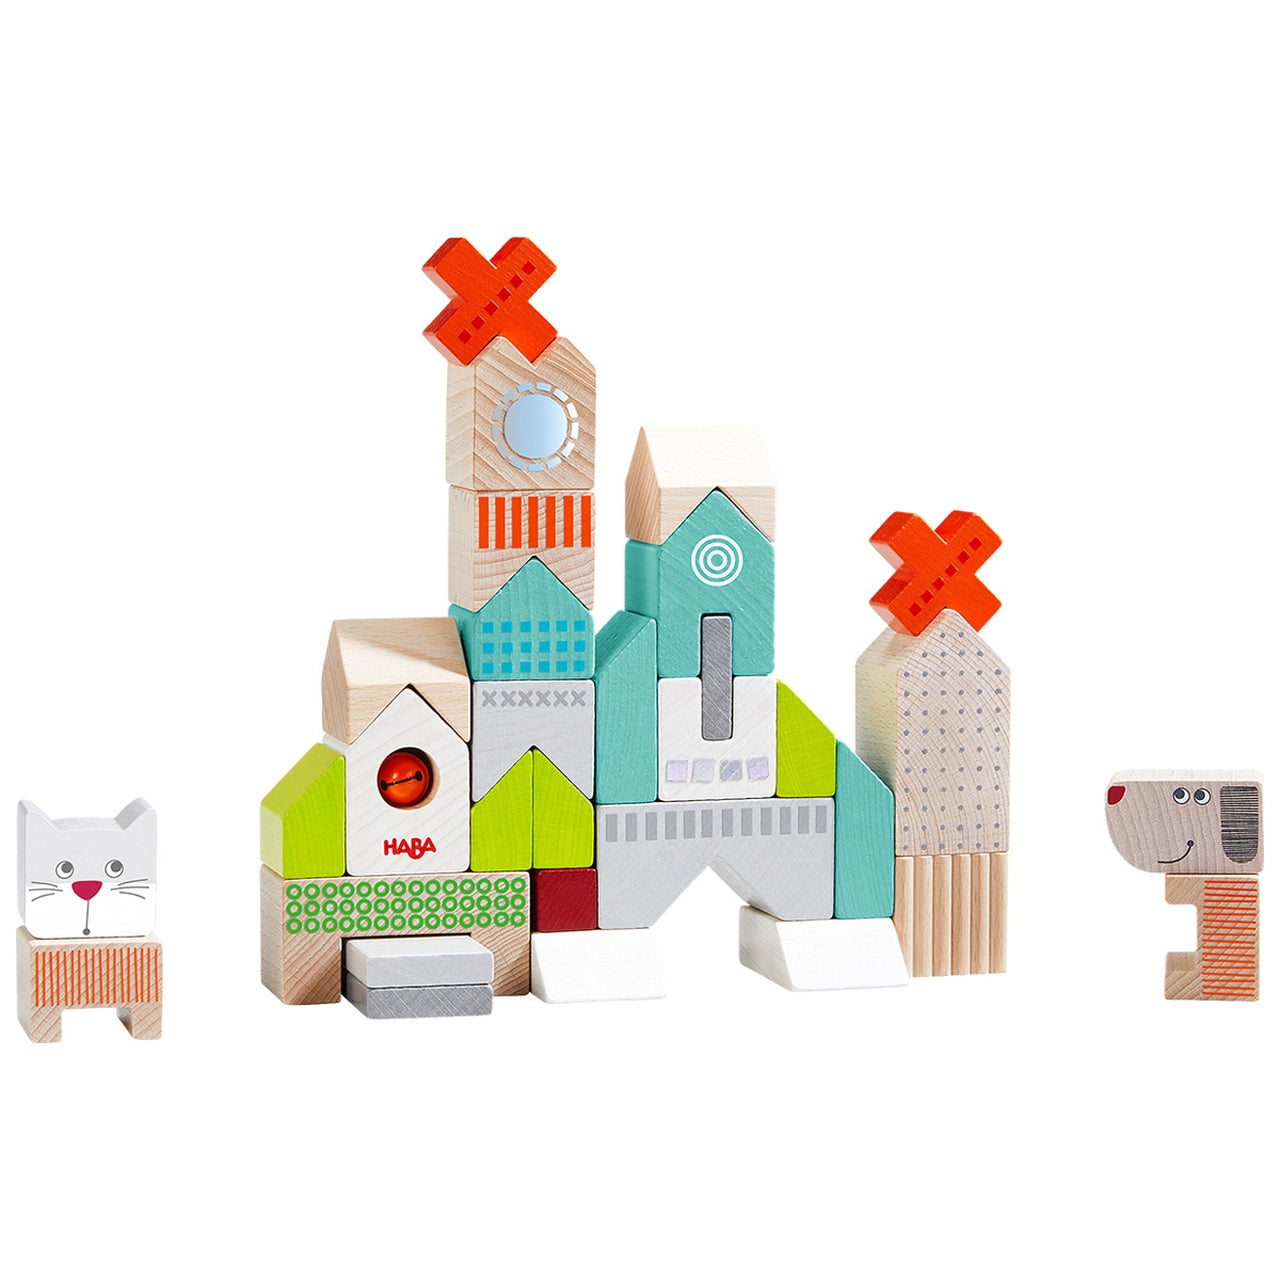 HABA Dog and Cat Wooden Building Block Set (31 Pieces)